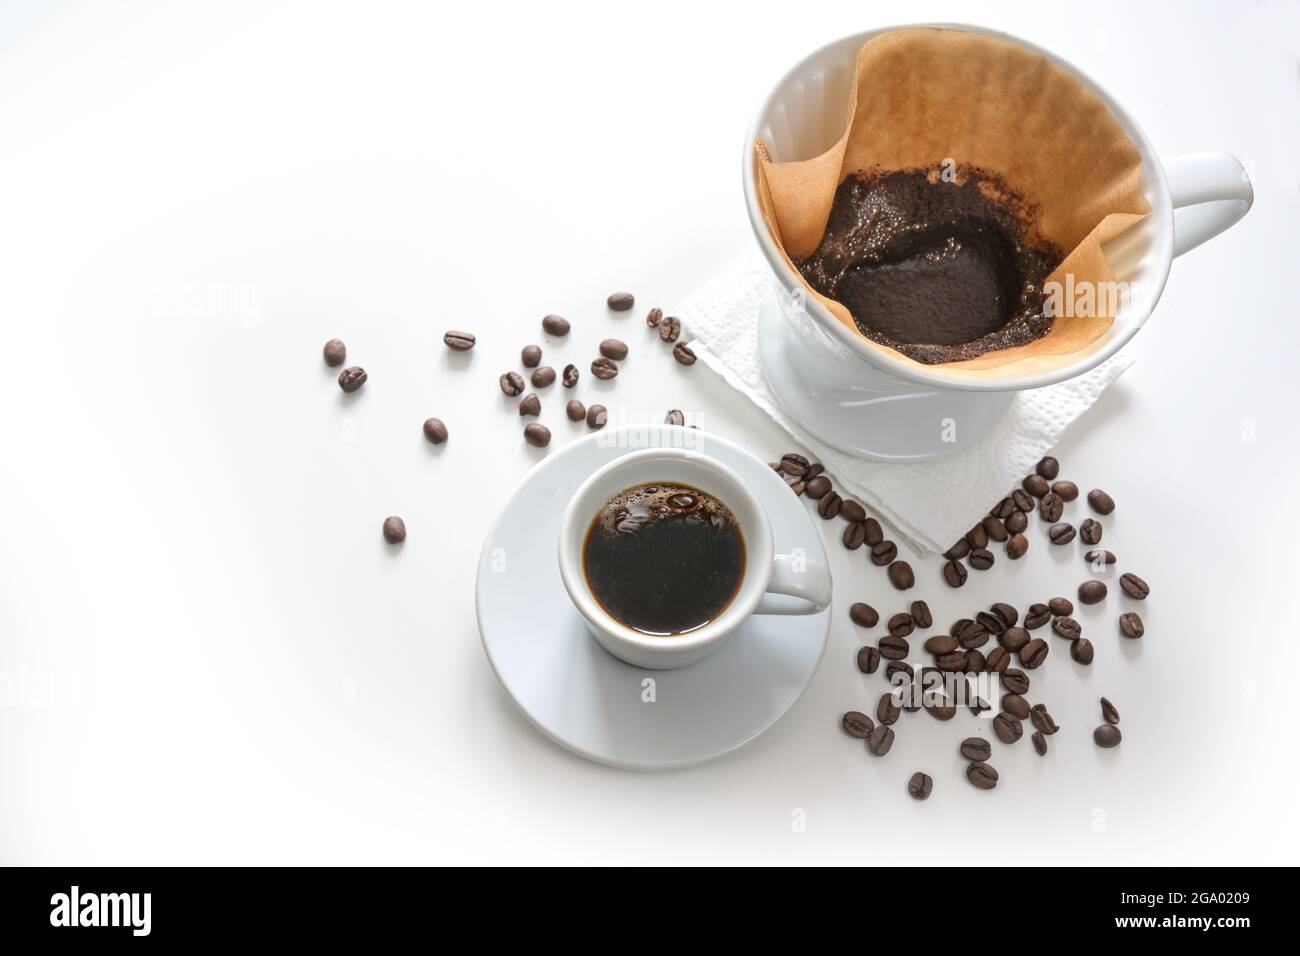 Coffee in a cup and ground coffee in a filter bag, drip brewed hot drink, light background fading to white with some beans, copy space, selected focus Stock Photo